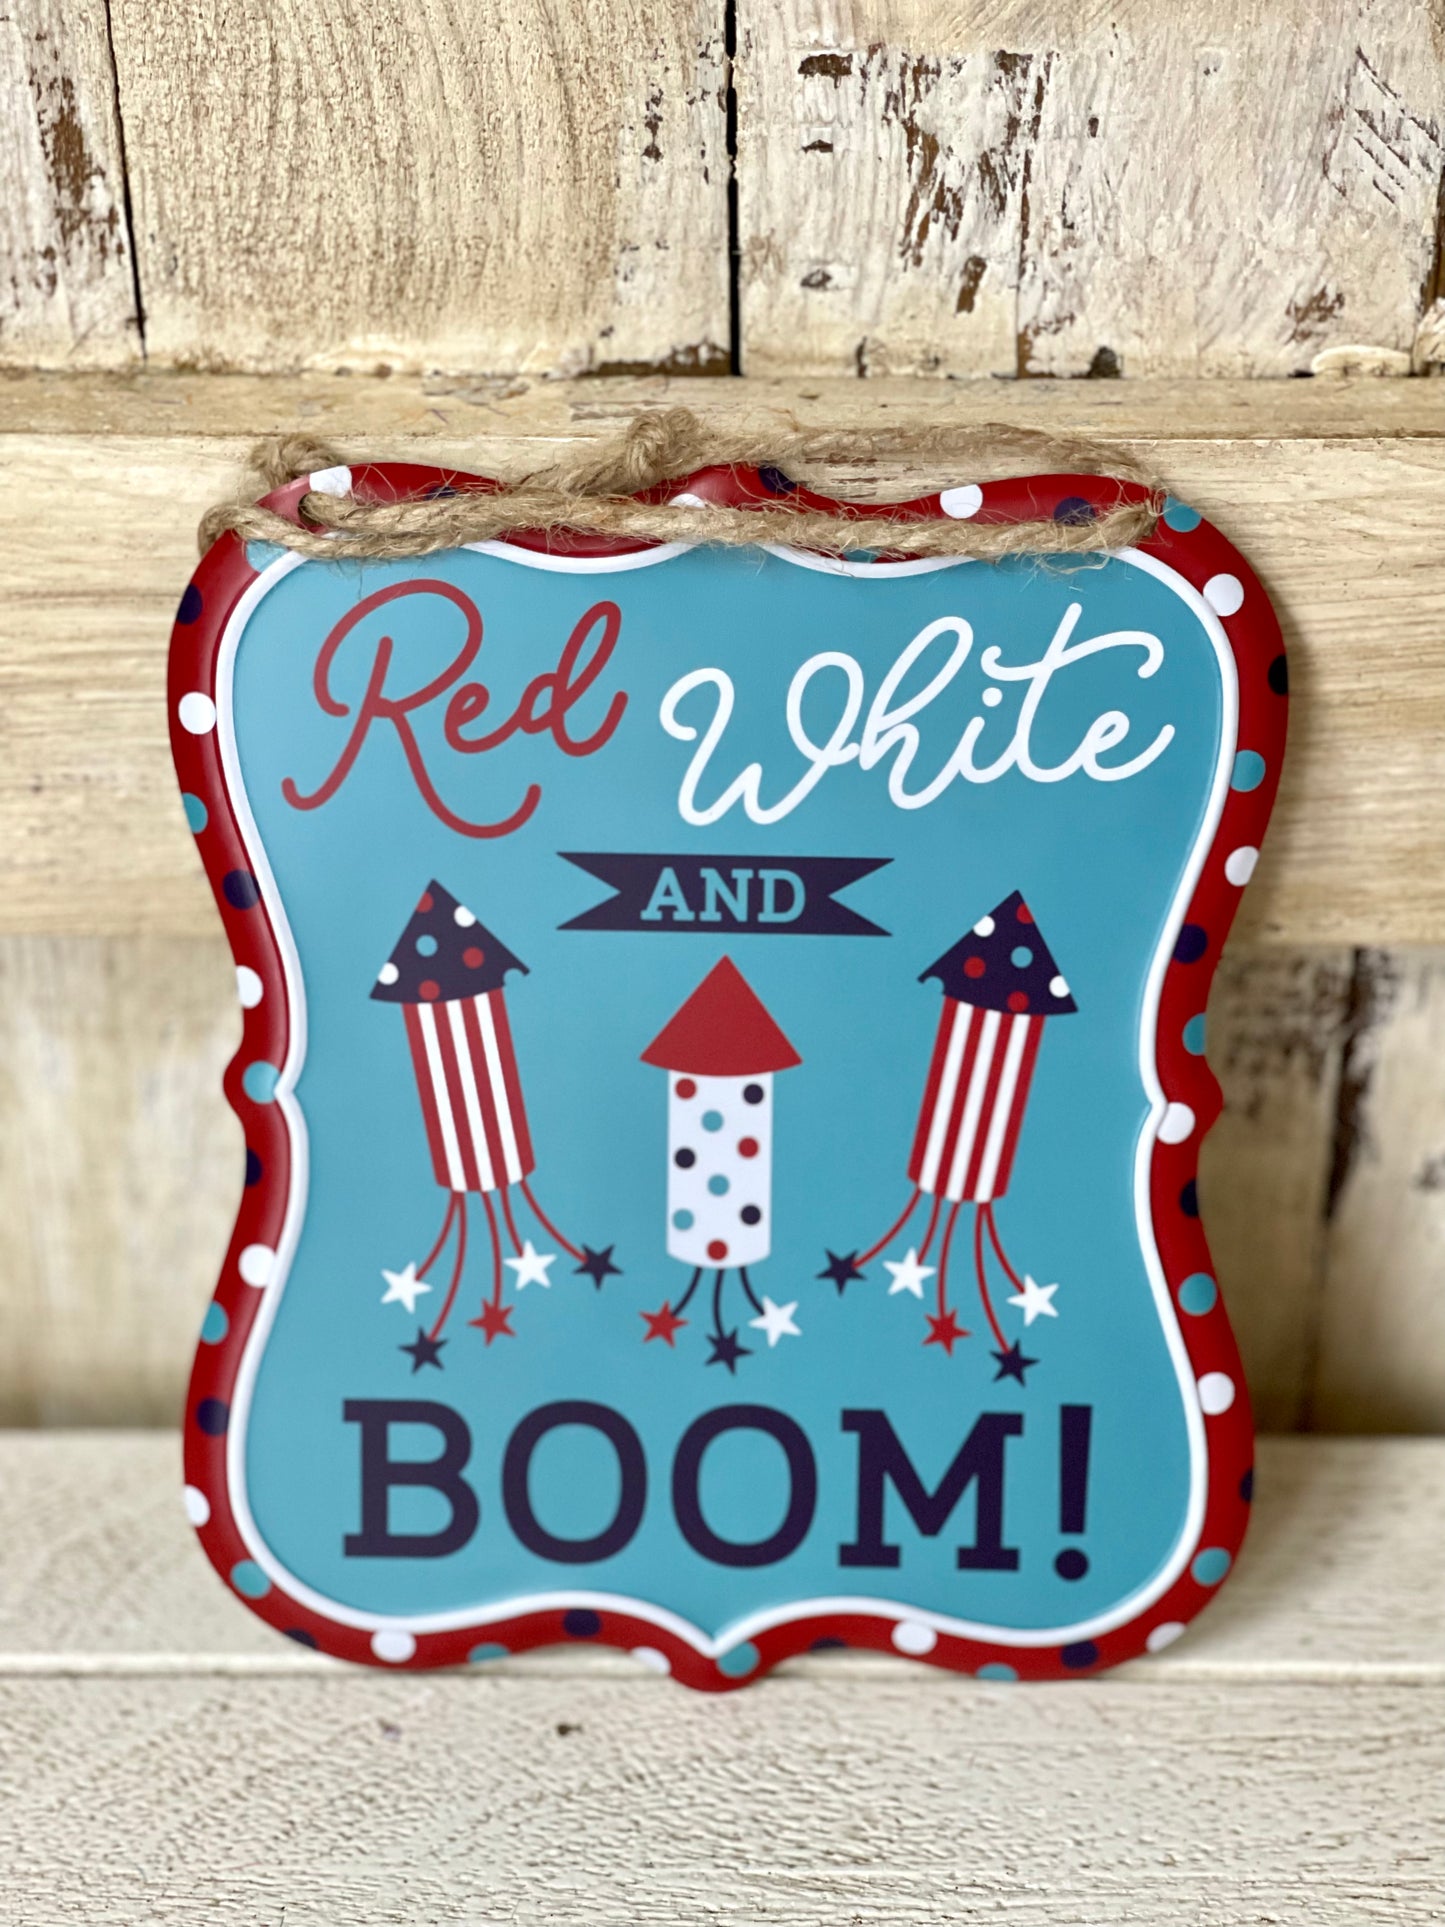 Tin Embossed Patriotic Sign Four Styles